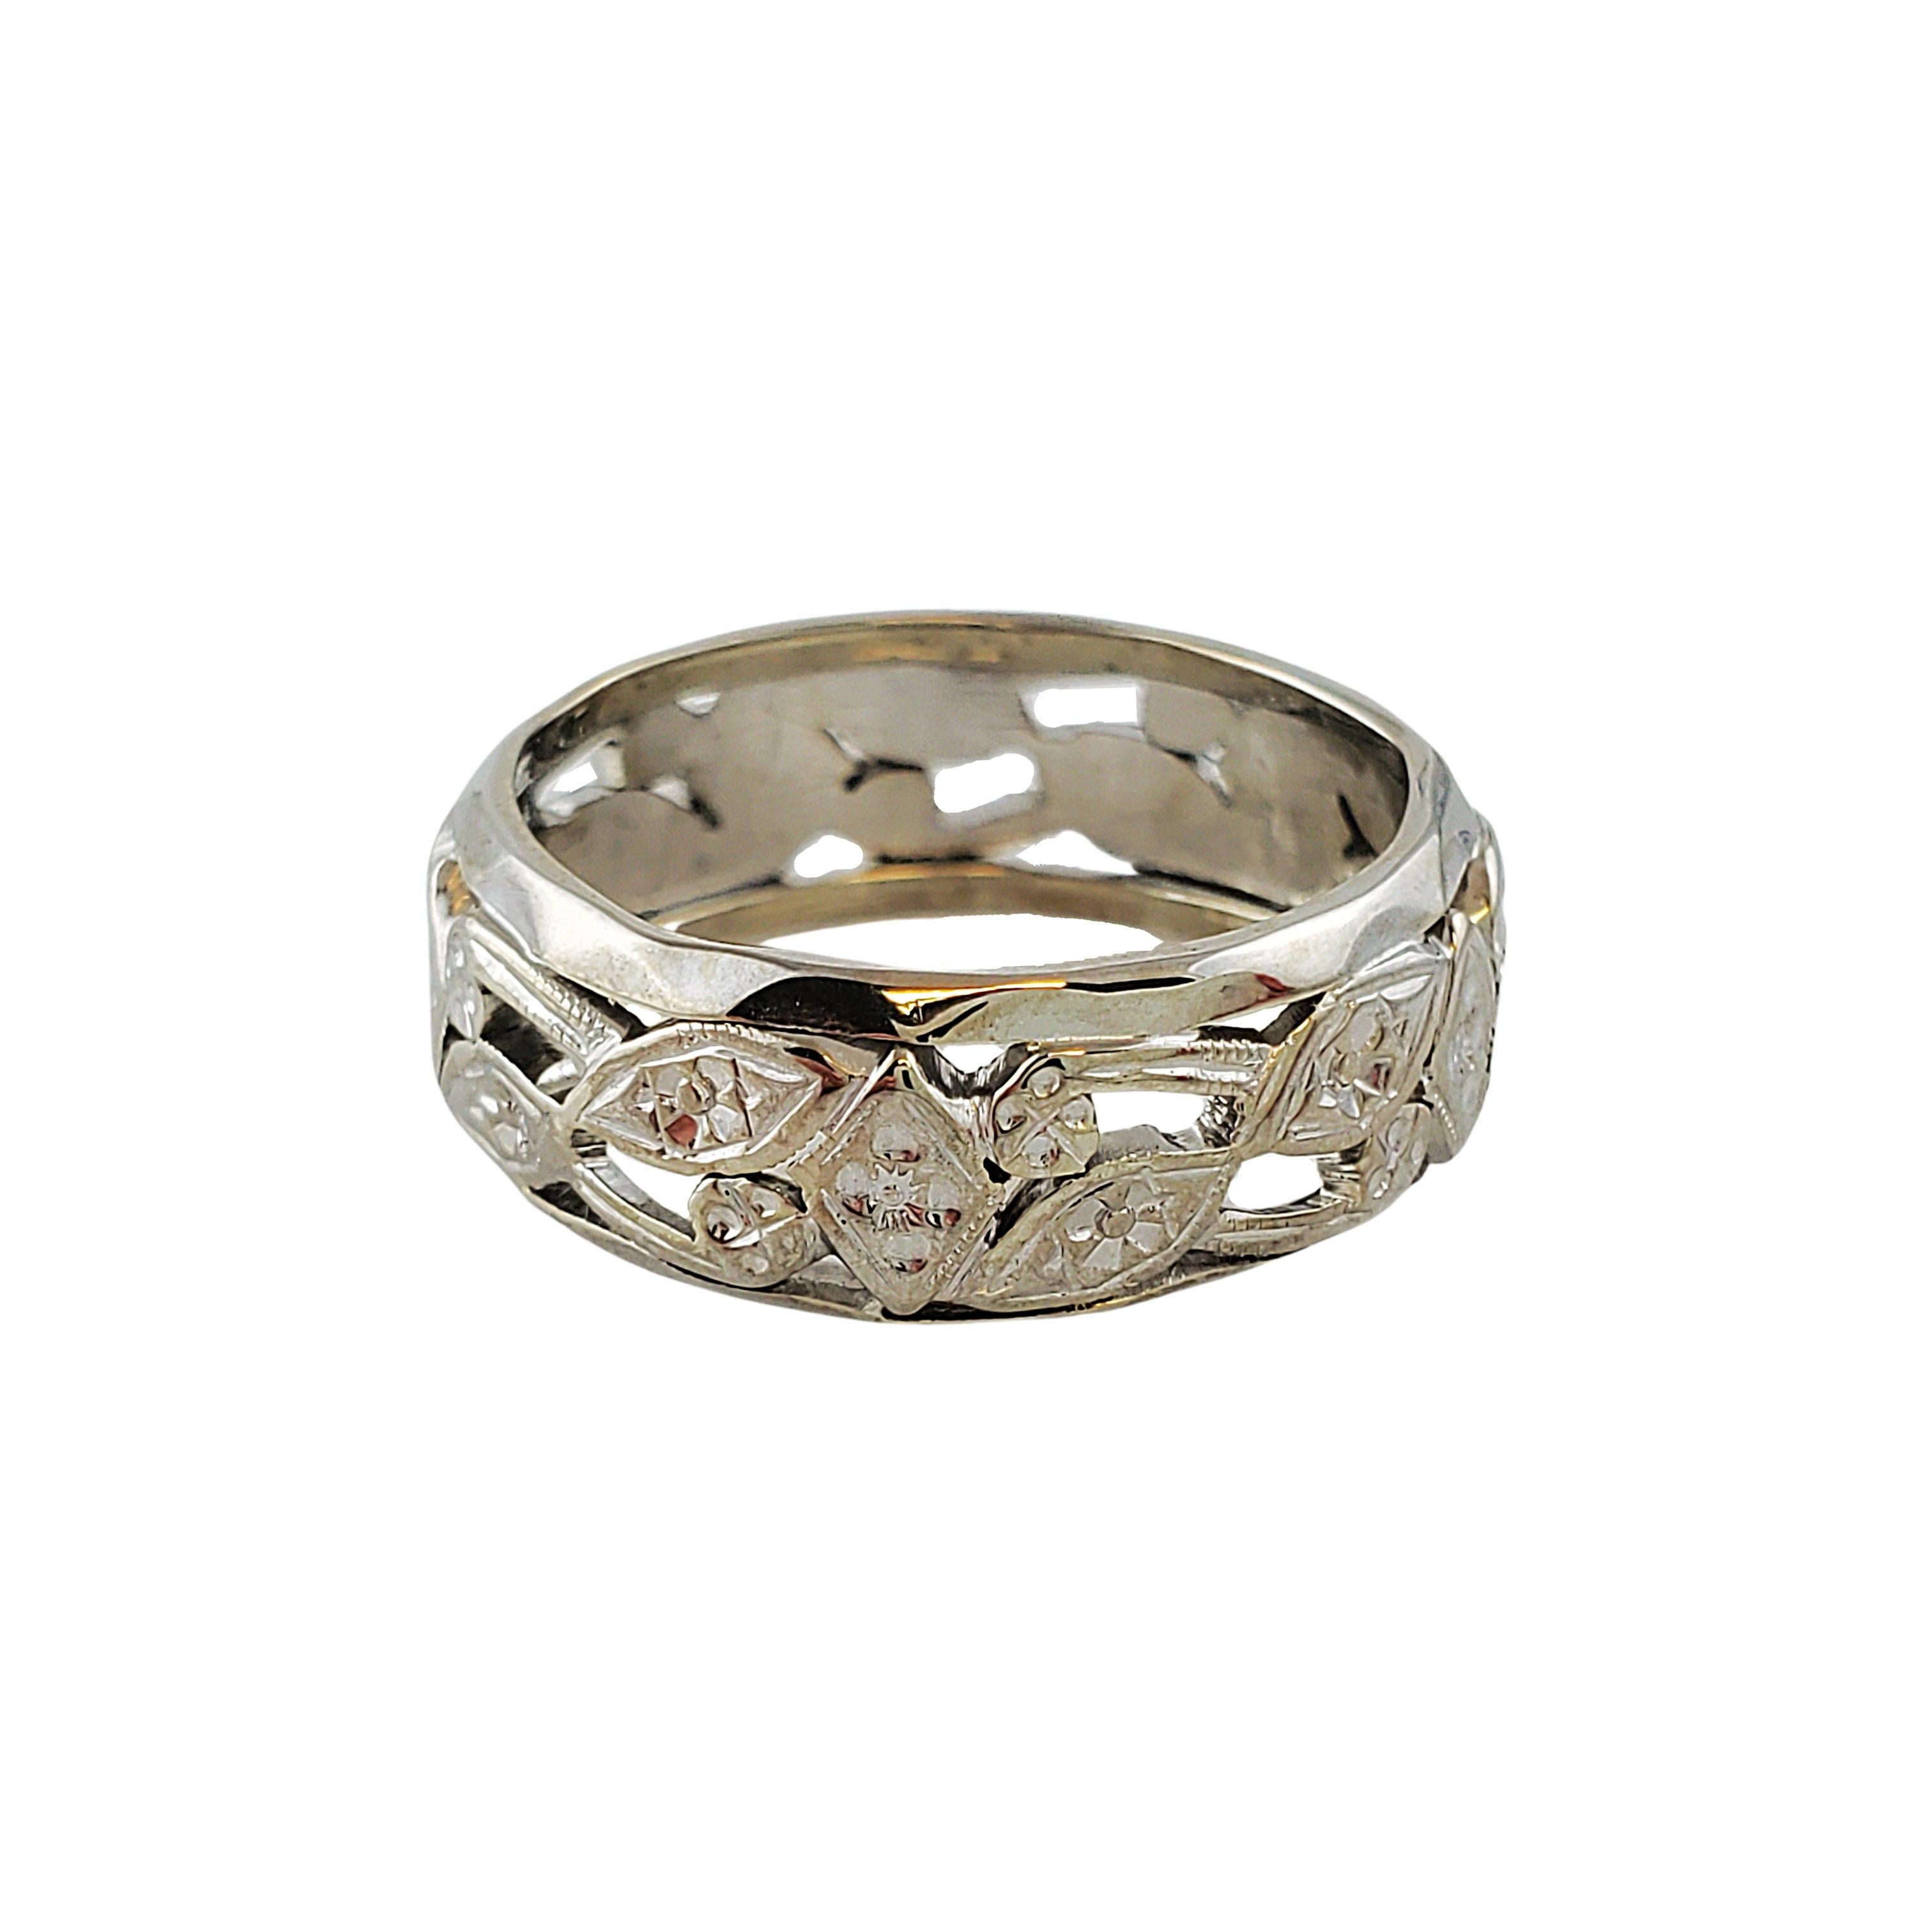 Vintage 14K White Gold Leaf & Flower Band Size 5.5

Beautifully designed 14K white gold leaf and flower band has wonderful detailing woven through out the entire ring. Detailing such as cut outs exposing skin in some areas and tiny flowers engraved